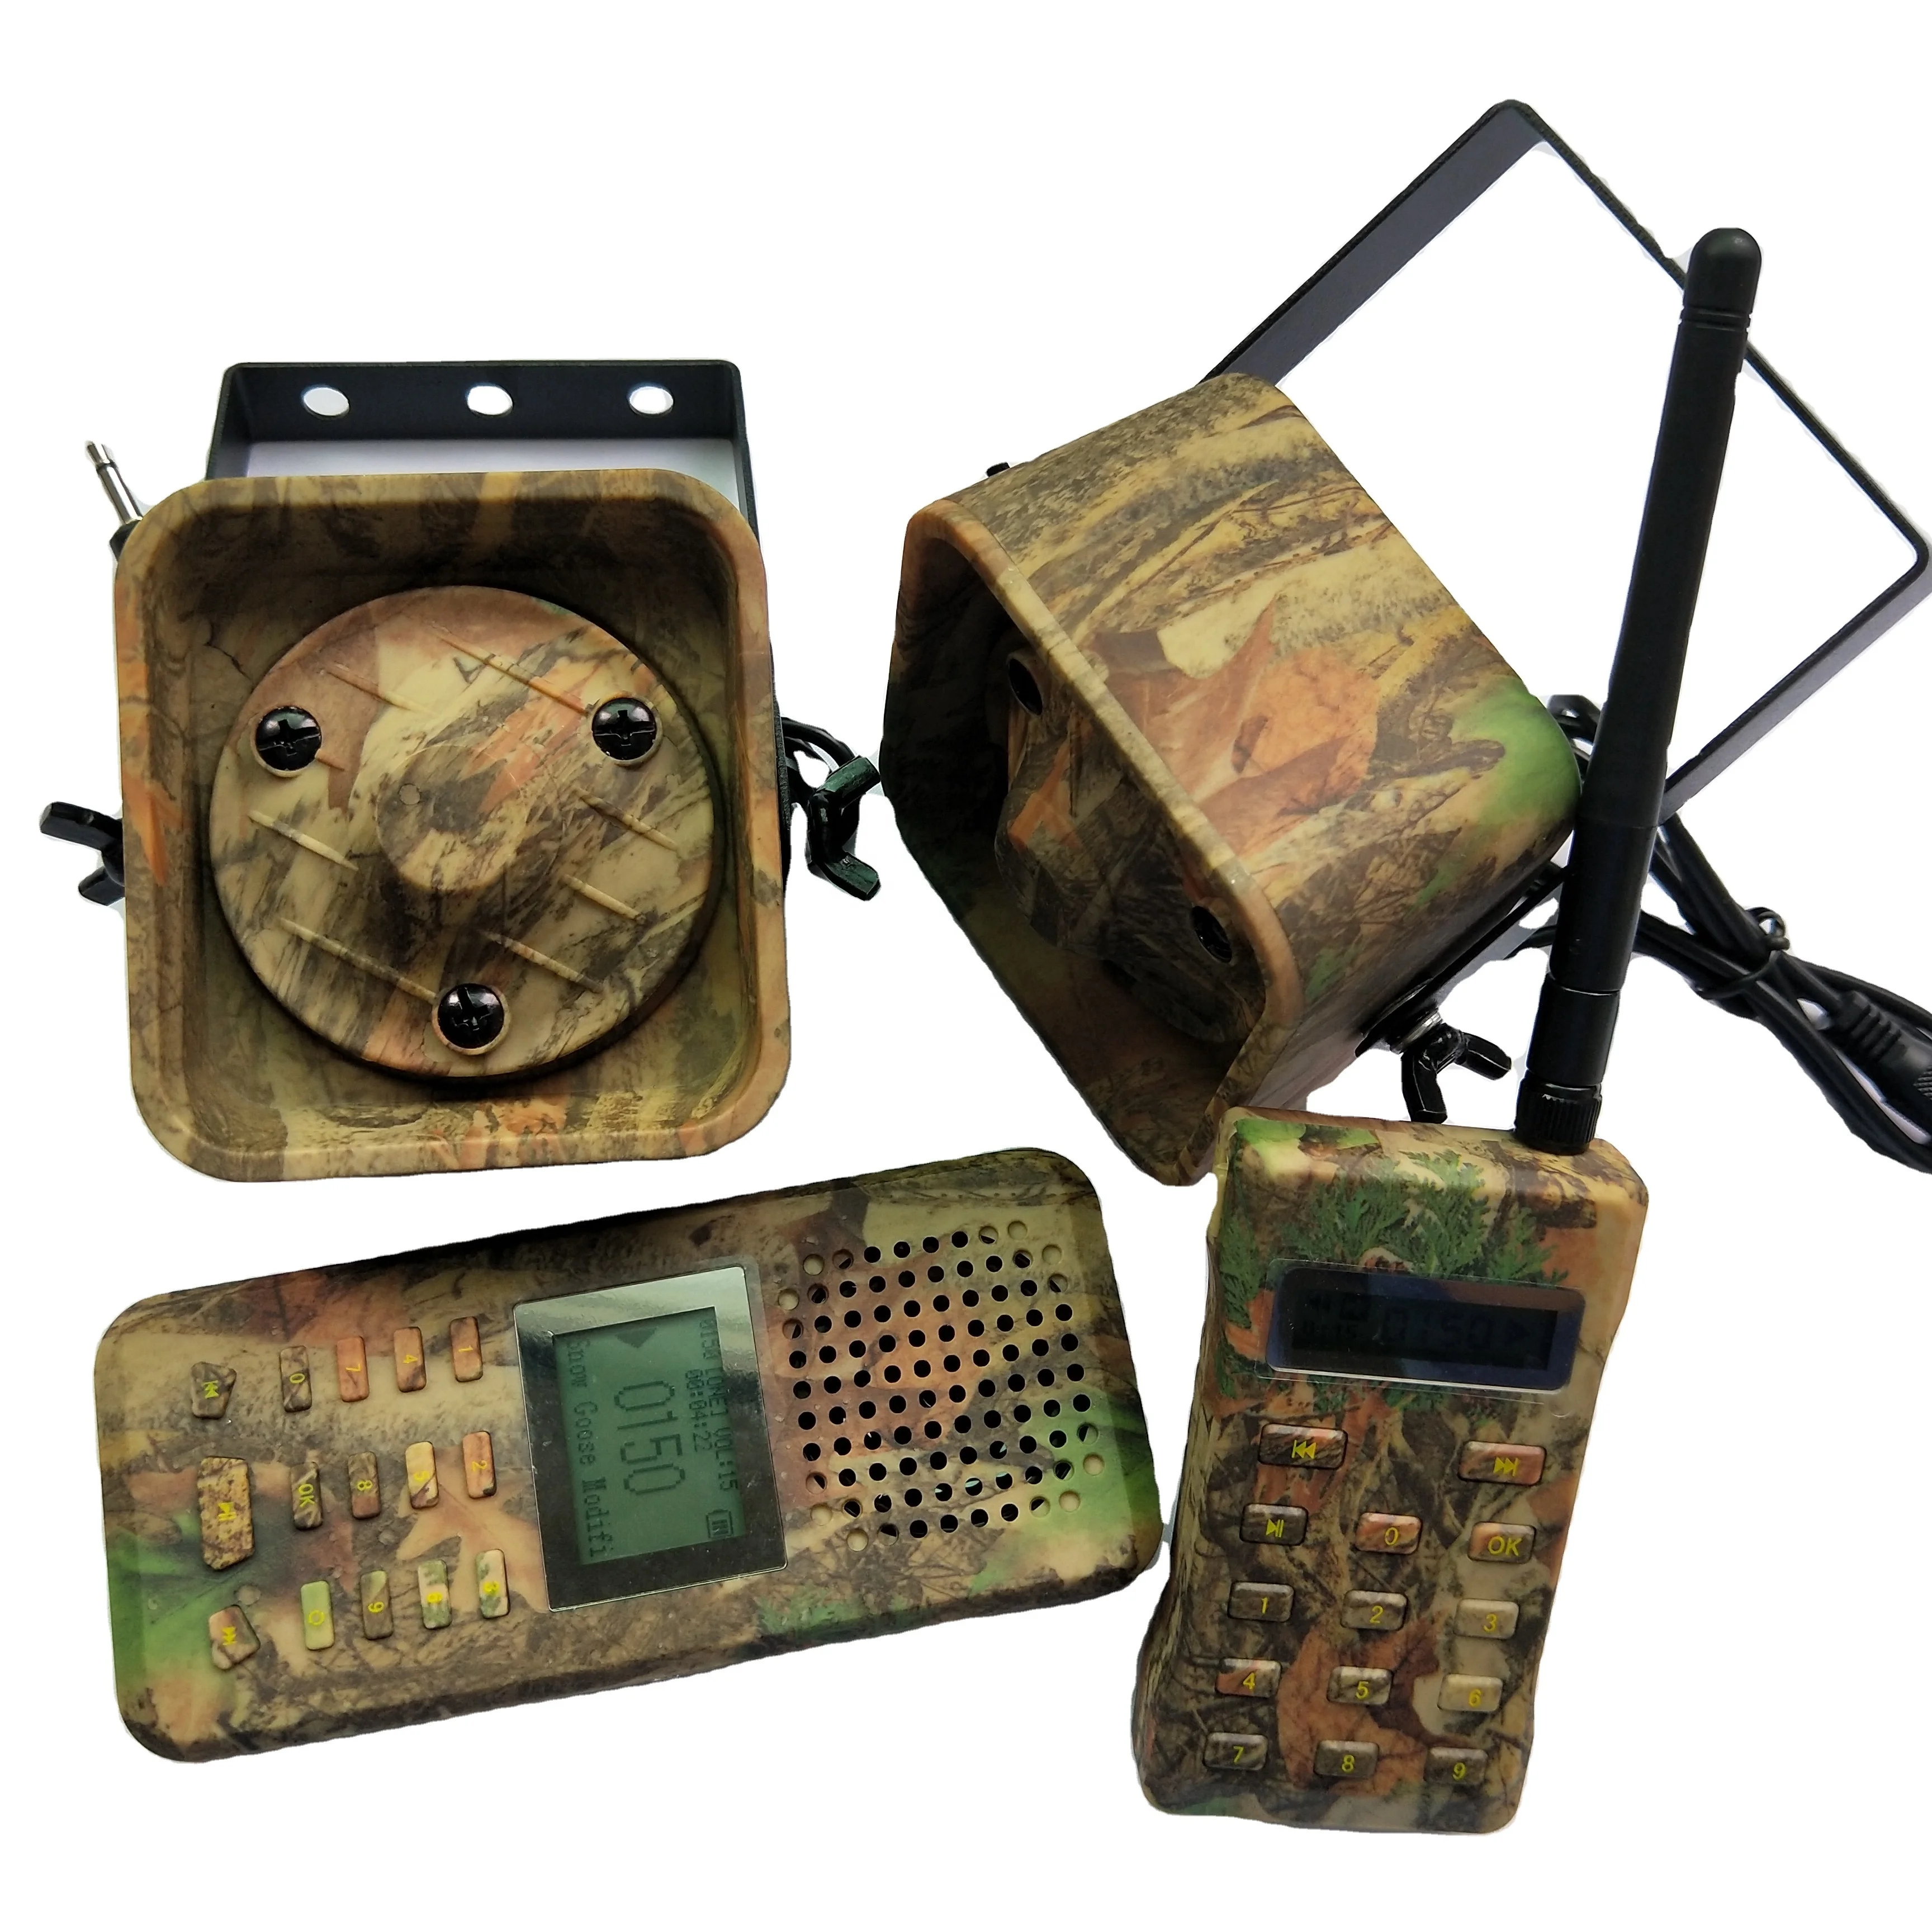 

2020 high quality plastic bird decoy hunting brid caller bk1519b with 300-500m remote, Green or camouflage